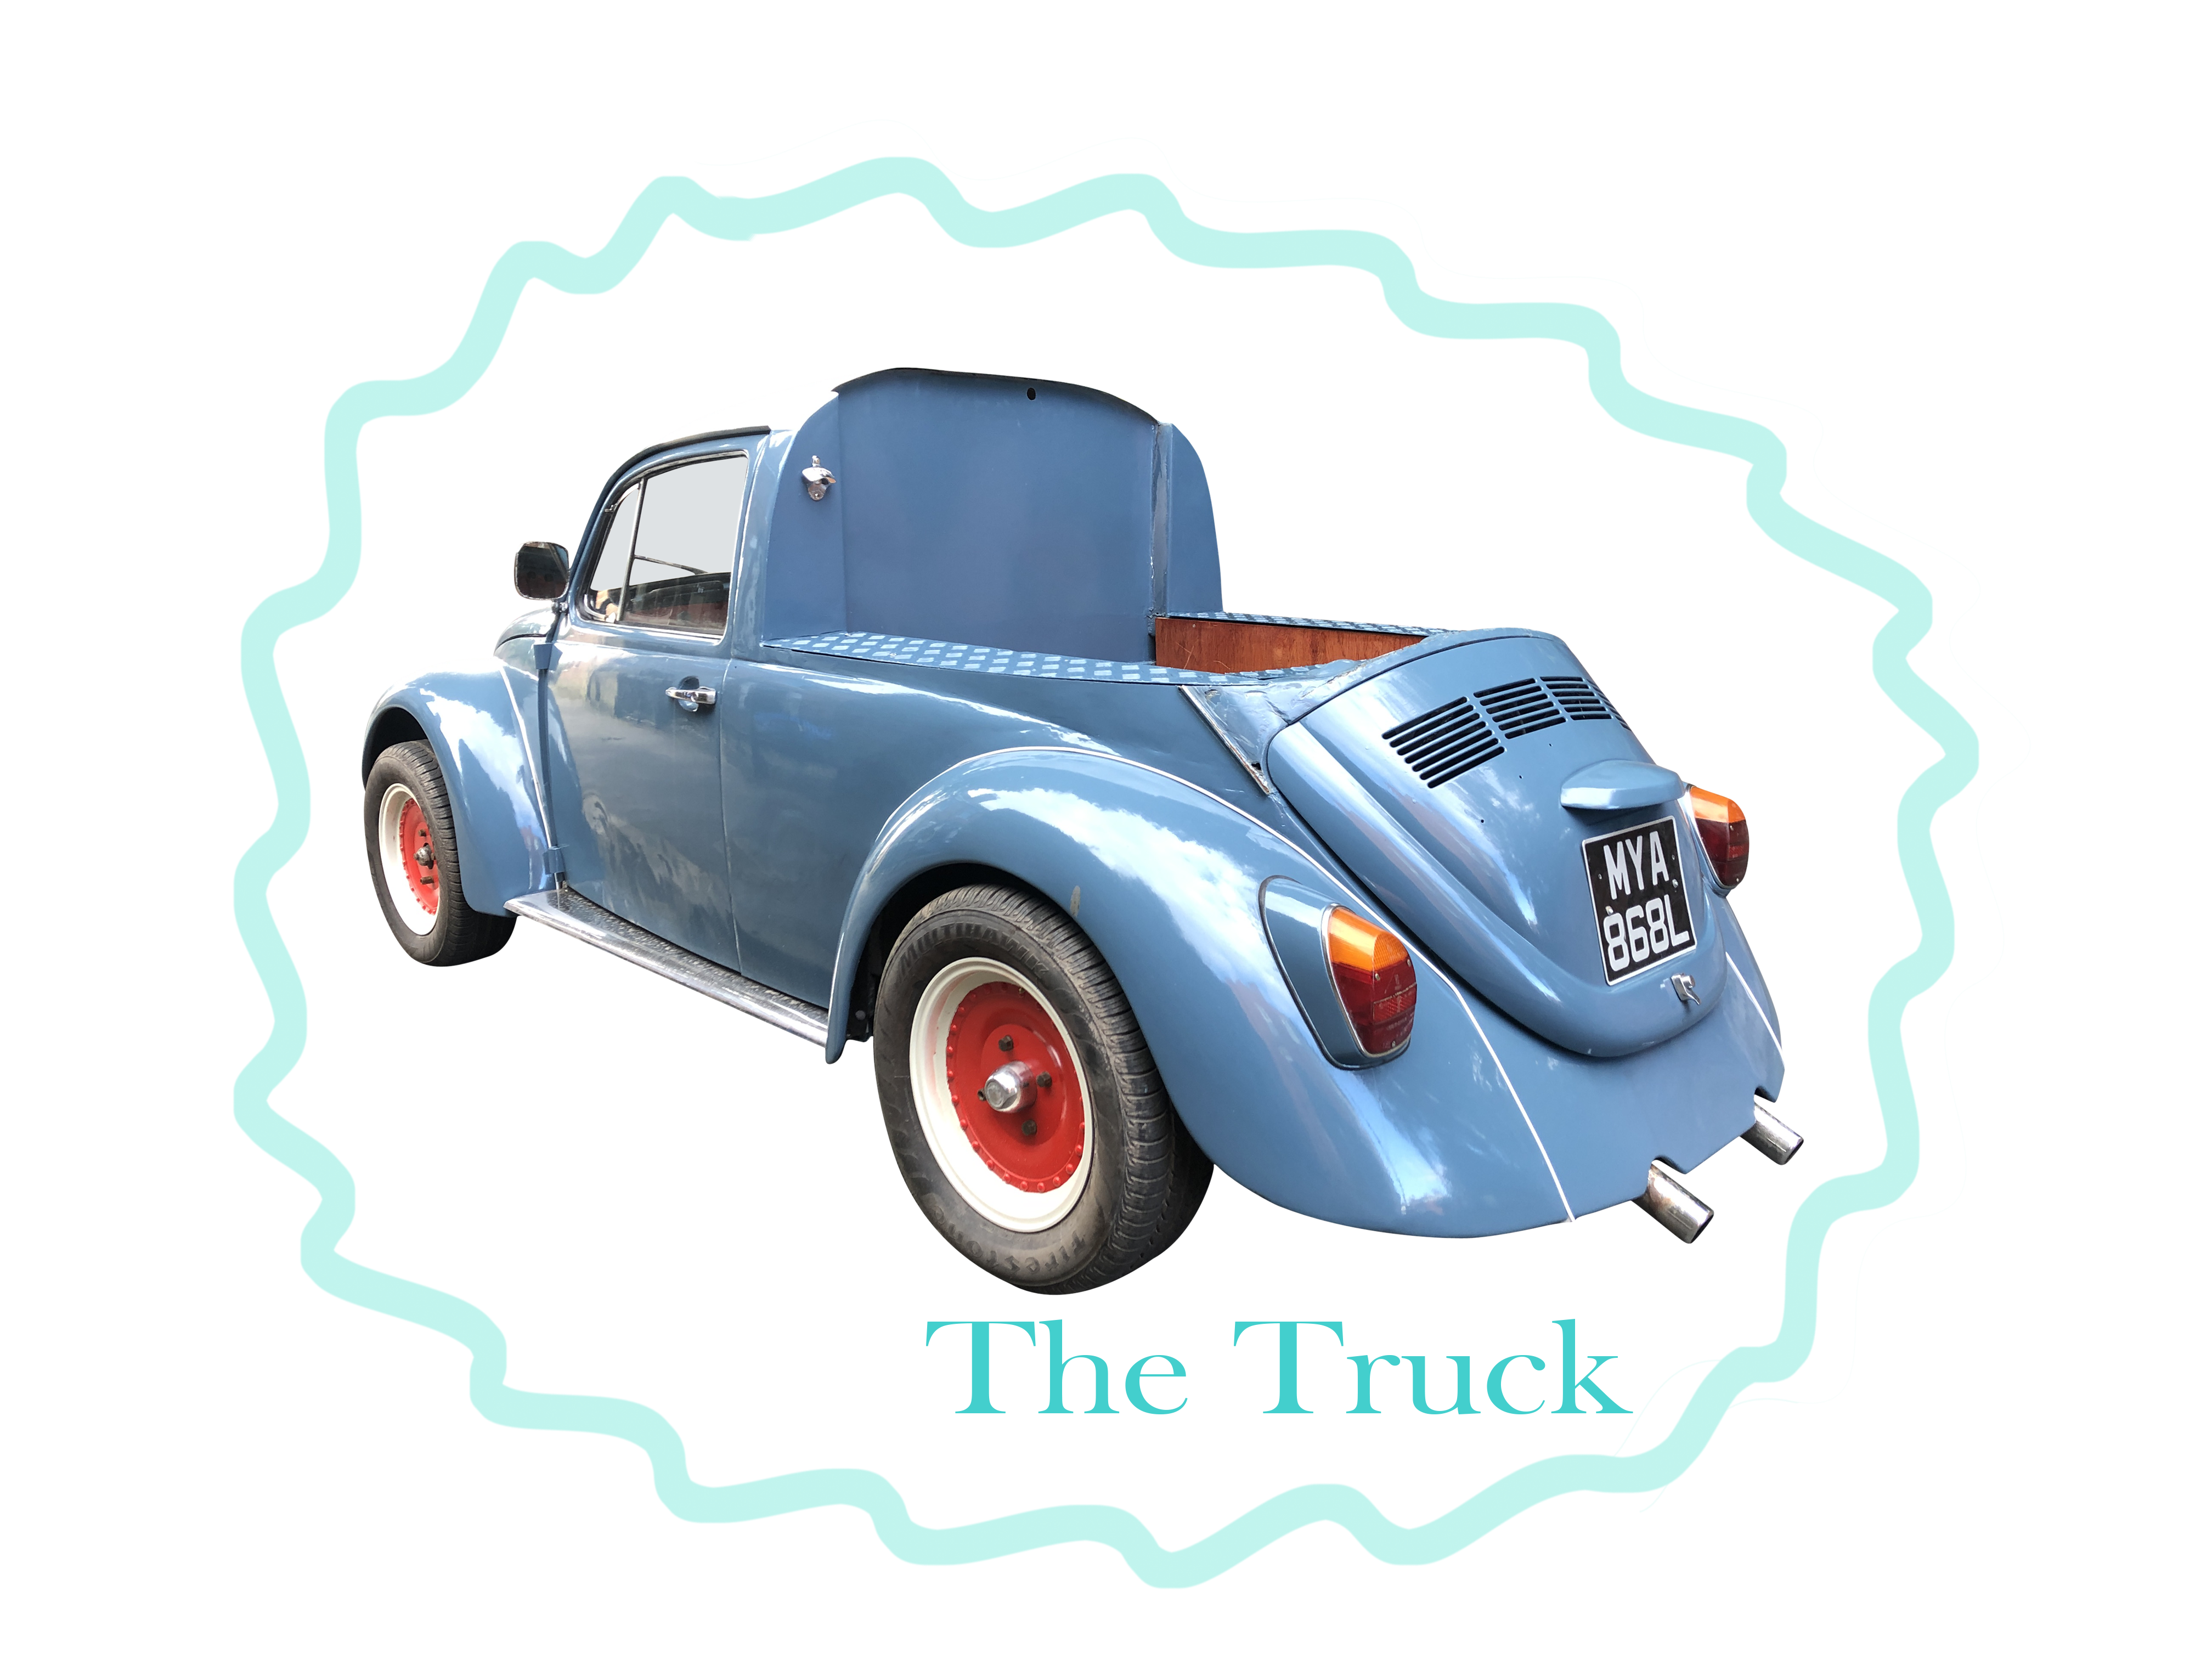 The Truck VW Beetle for hire